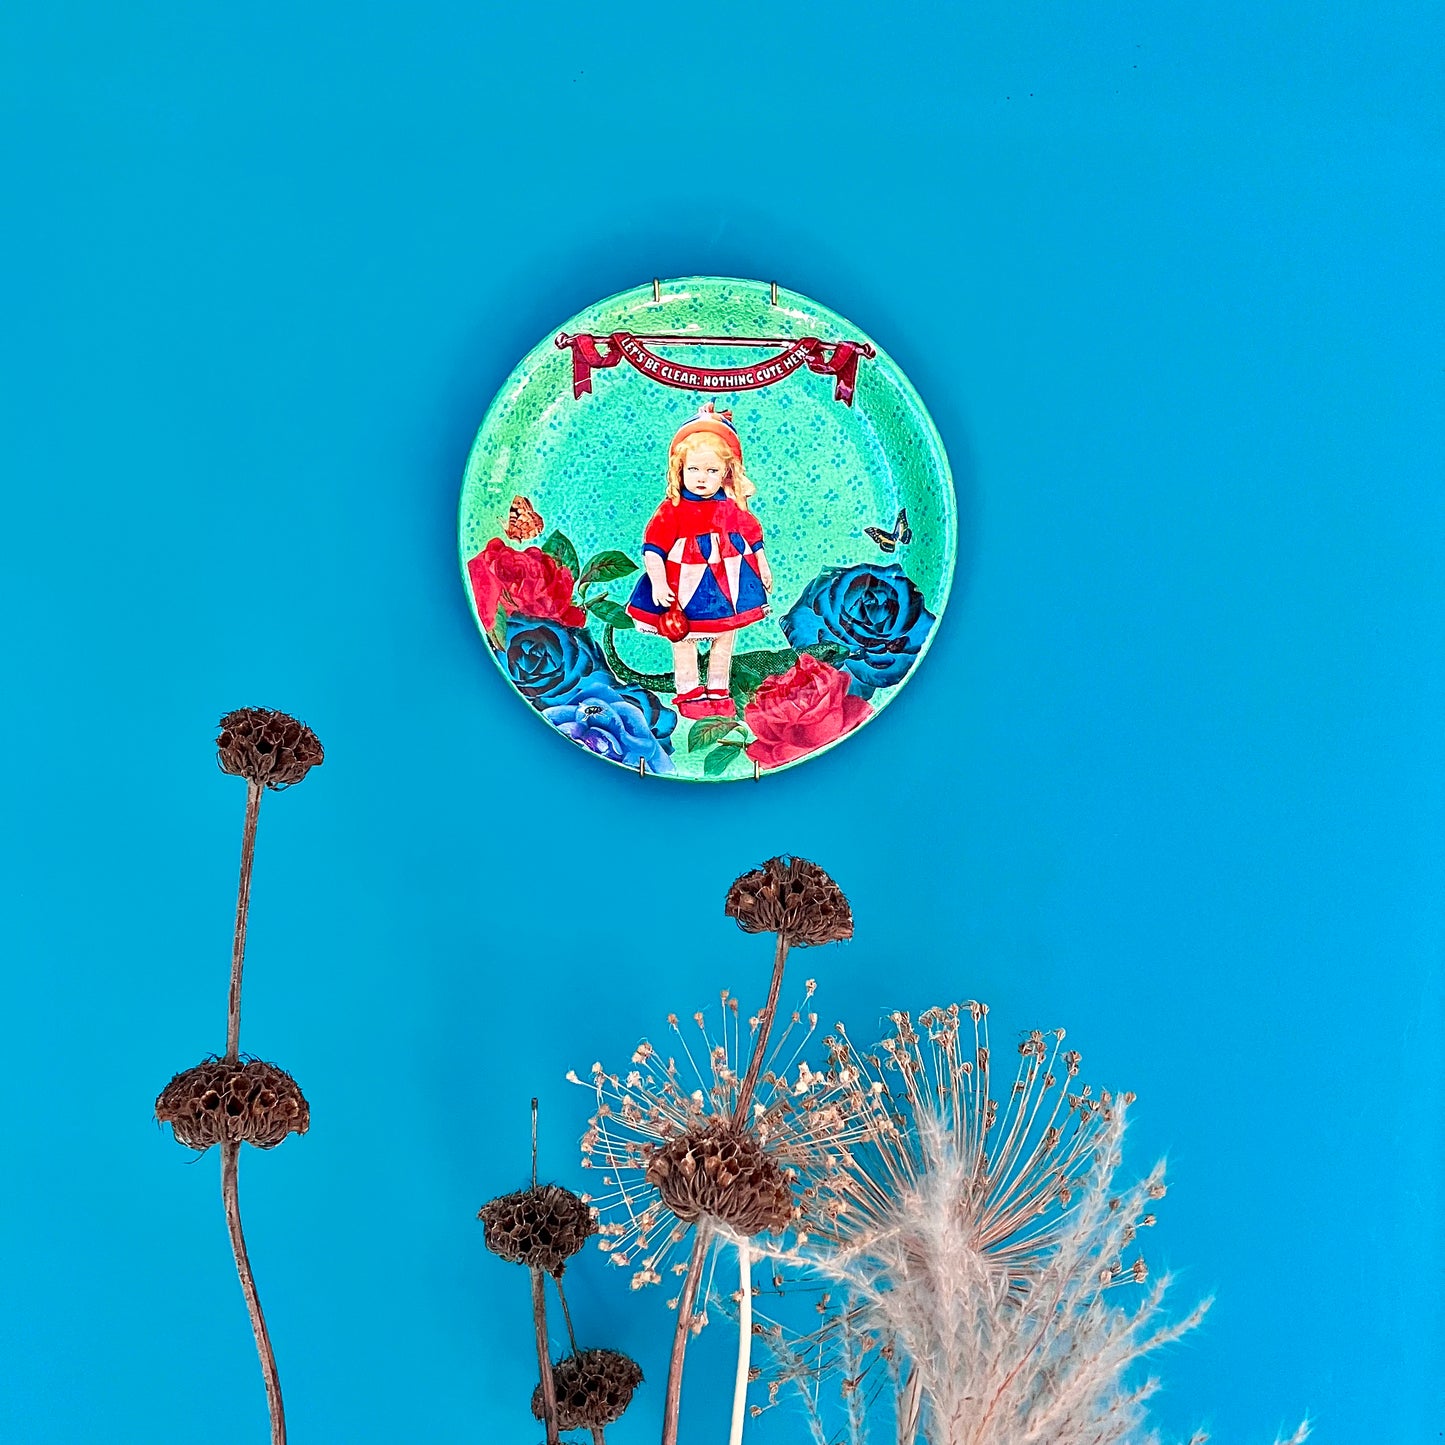 "Let's Be Clear: Nothing Cute Here" Wall Plate by House of Frisson, hanging on a blue wall.